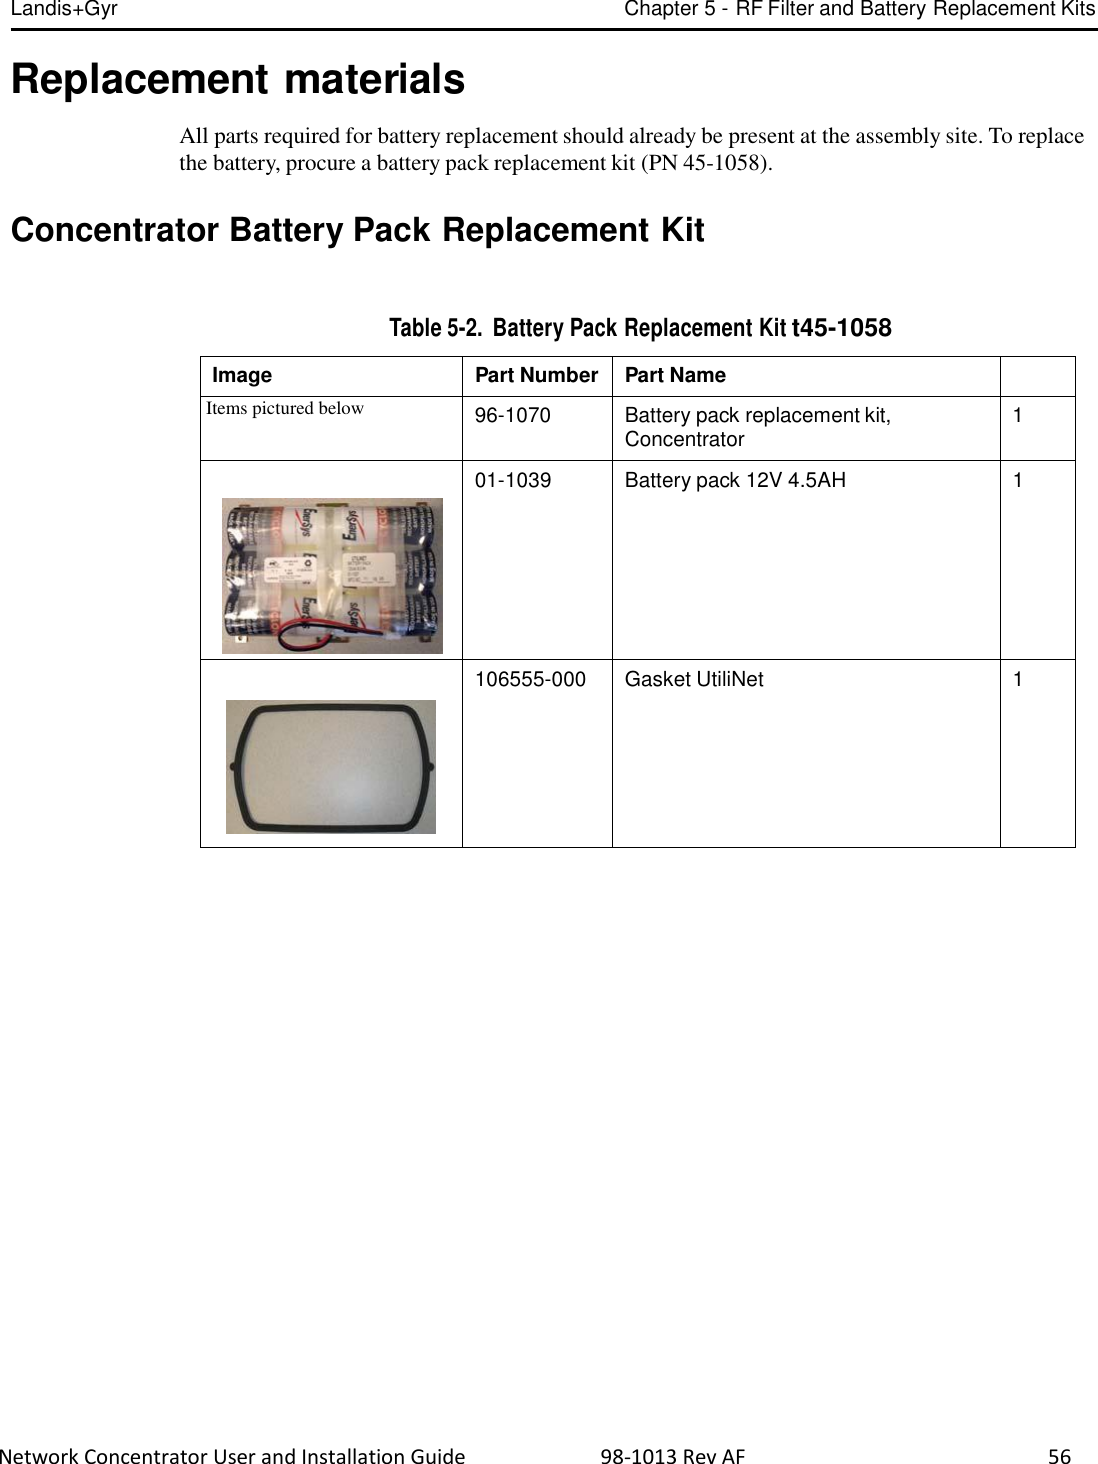 Landis+Gyr Chapter 5 - RF Filter and Battery Replacement Kits  Network Concentrator User and Installation Guide                          98-1013 Rev AF    56   Replacement materials  All parts required for battery replacement should already be present at the assembly site. To replace the battery, procure a battery pack replacement kit (PN 45-1058).   Concentrator Battery Pack Replacement Kit    Table 5-2.  Battery Pack Replacement Kit t45-1058  Image Part Number Part Name  Items pictured below 96-1070 Battery pack replacement kit, Concentrator 1    01-1039 Battery pack 12V 4.5AH 1     106555-000 Gasket UtiliNet 1 